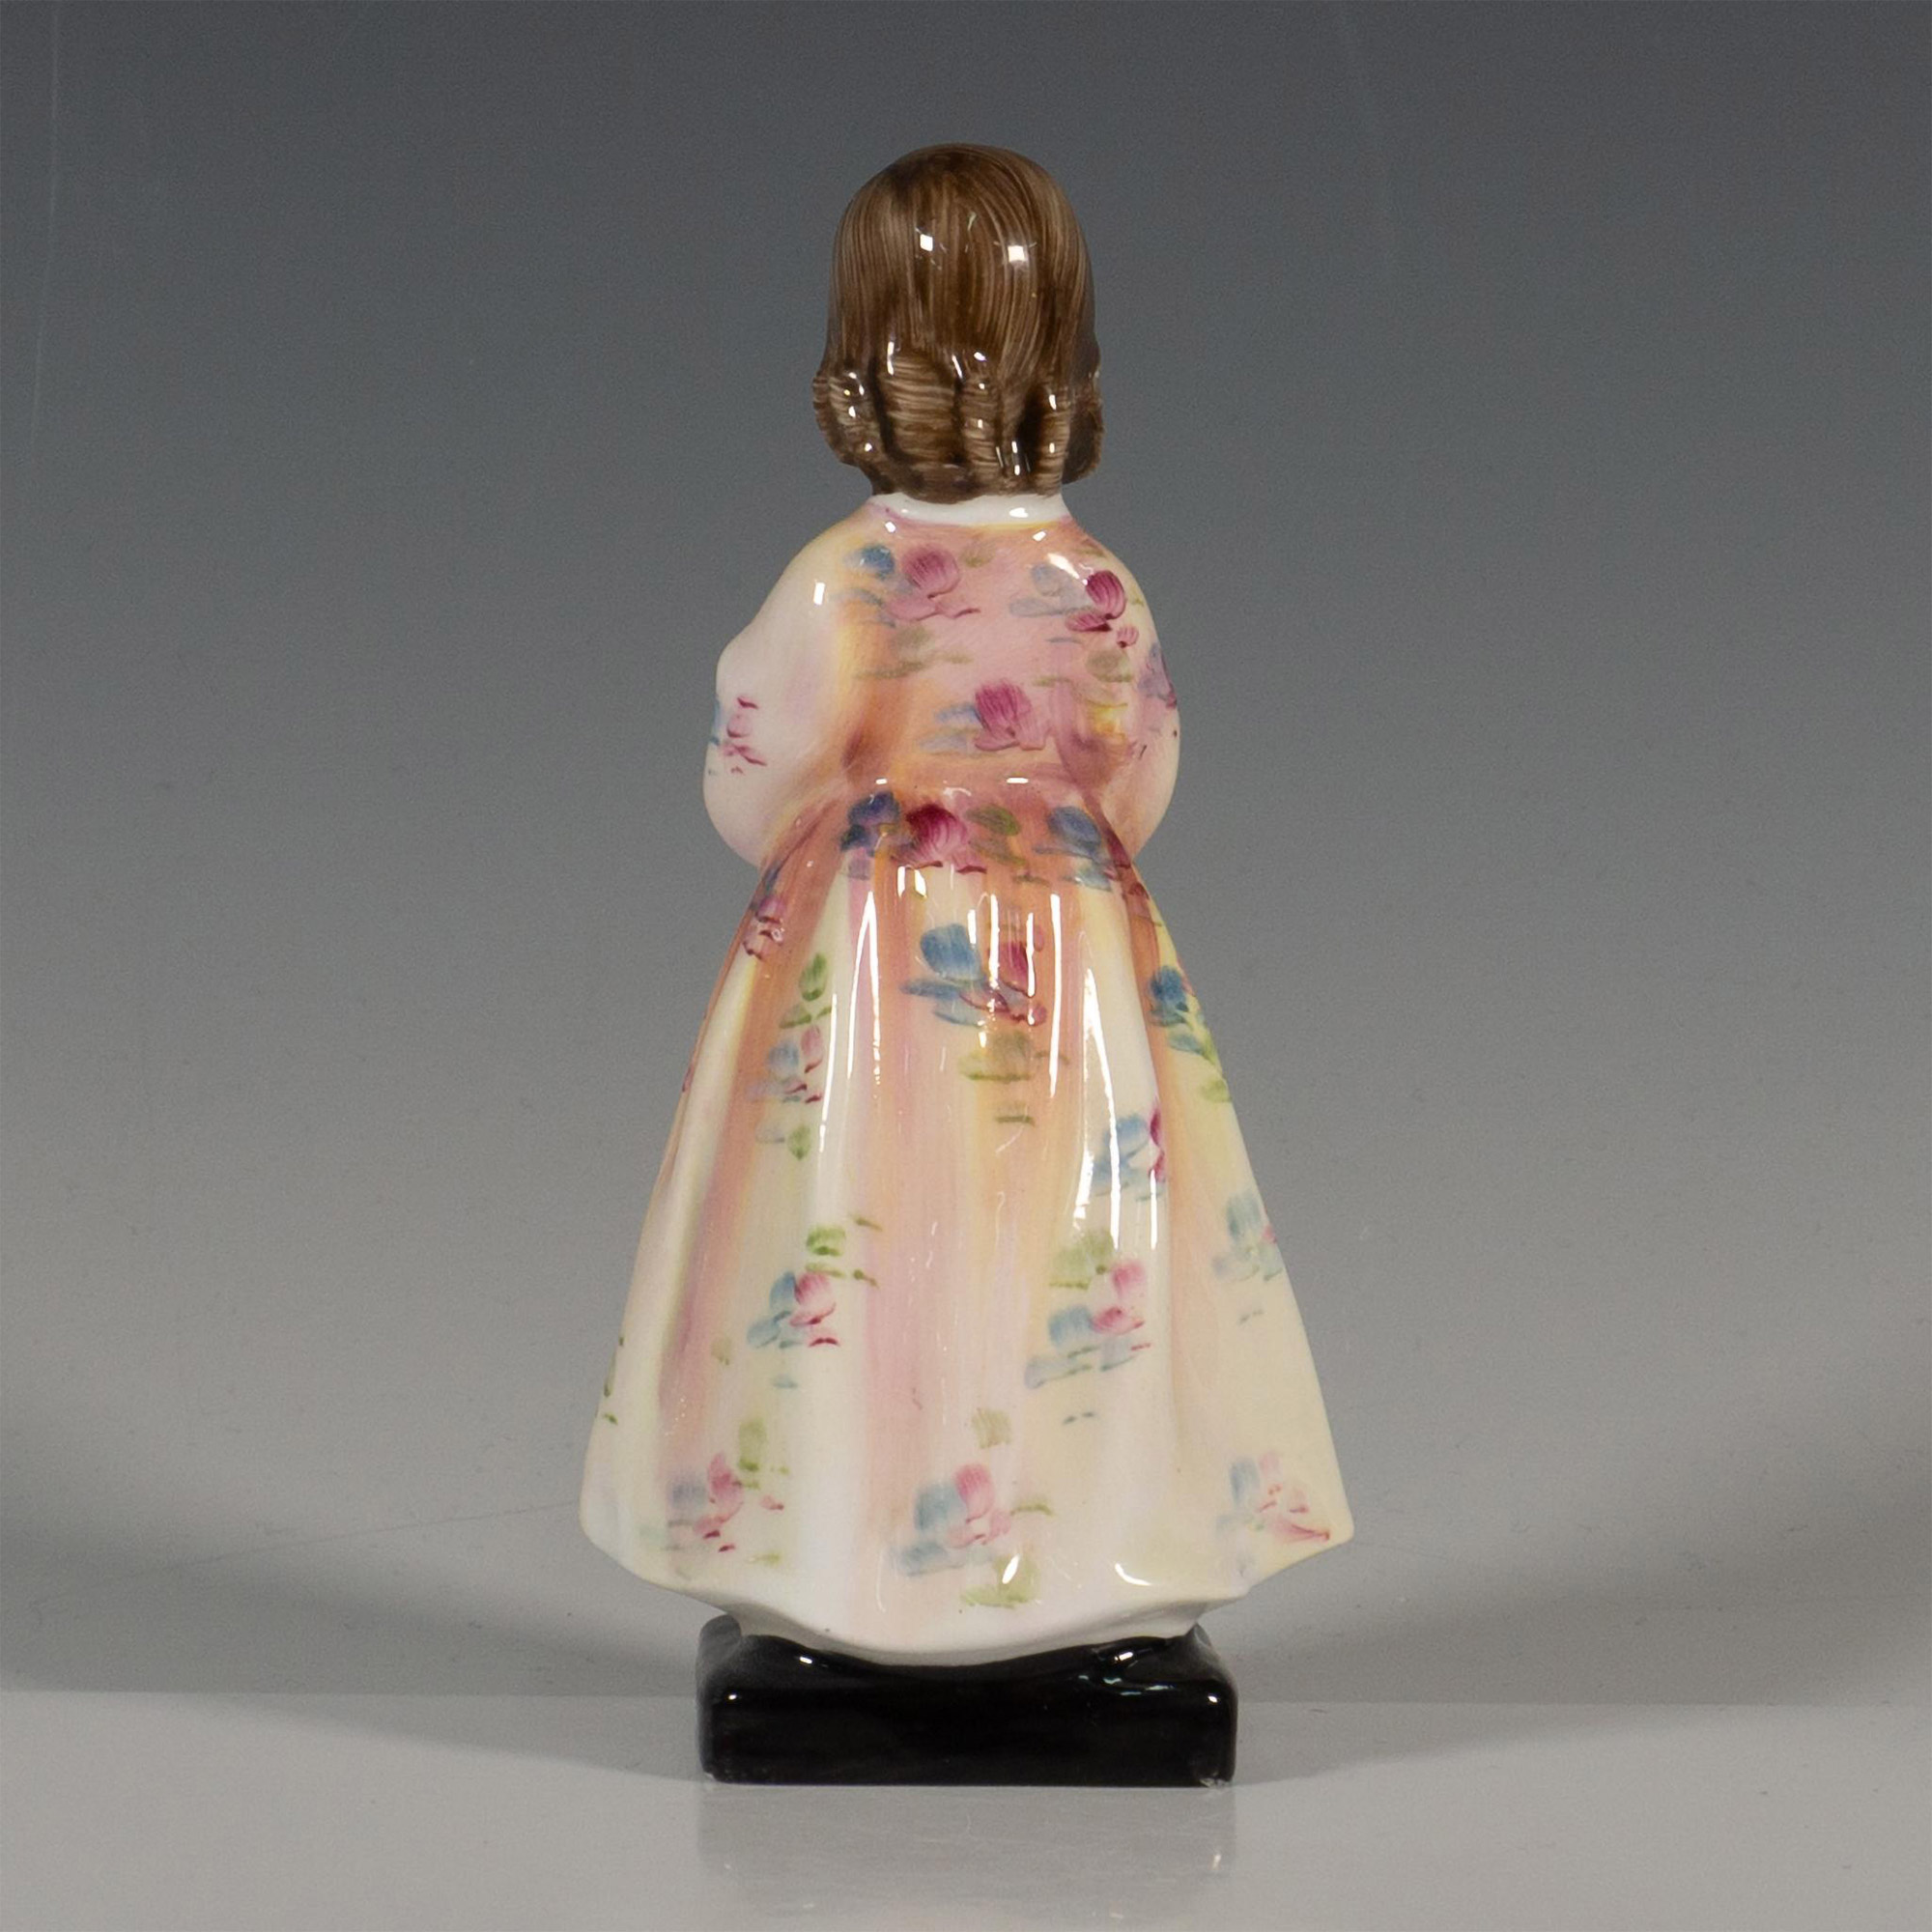 Bedtime HN1978, Prototype Colorway - Royal Doulton Figurine - Image 4 of 5